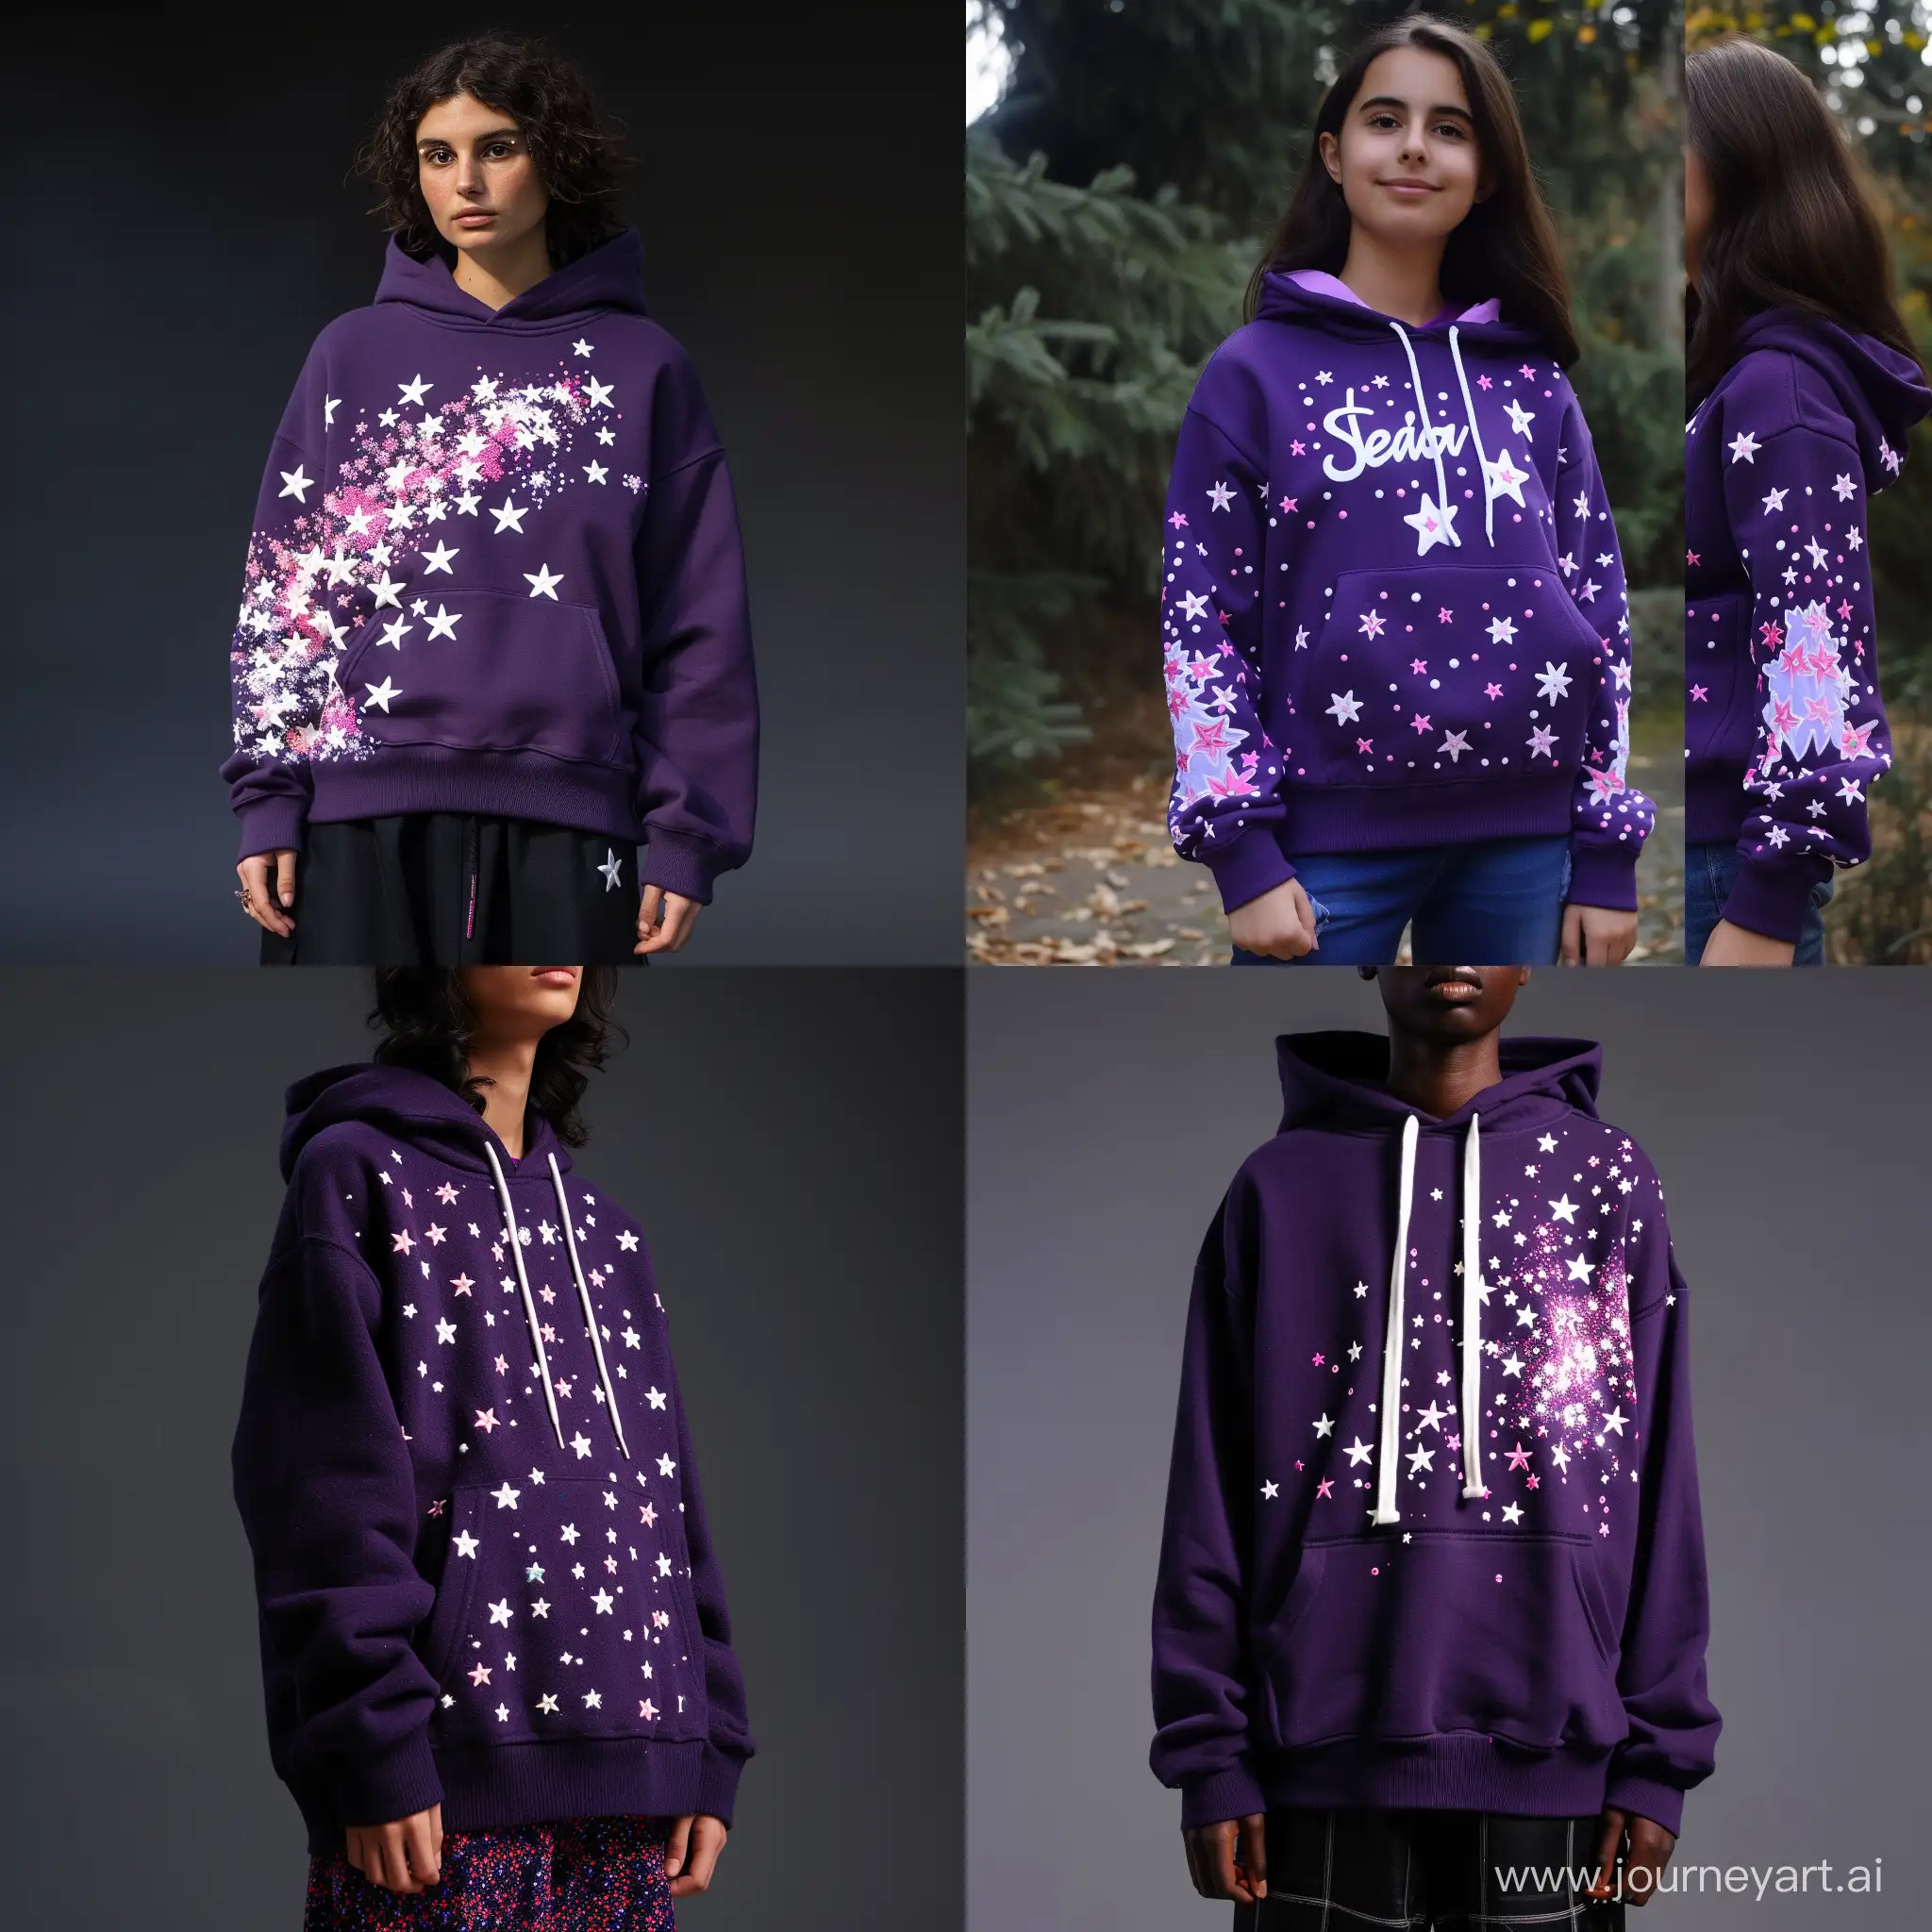 Purple hoodie with white and pink stars and white embroidered lettering, on the model's person